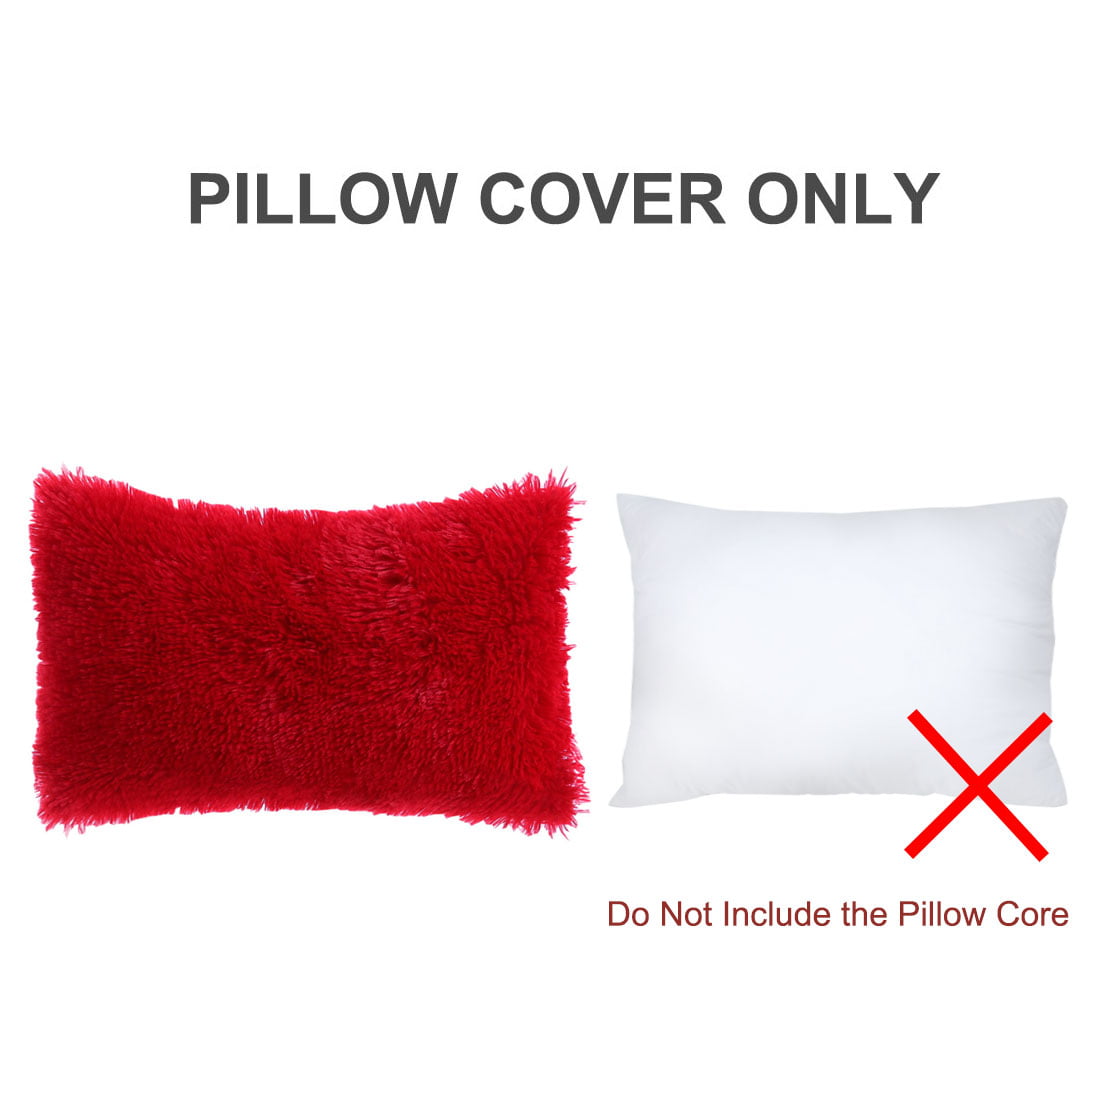 red fuzzy pillow